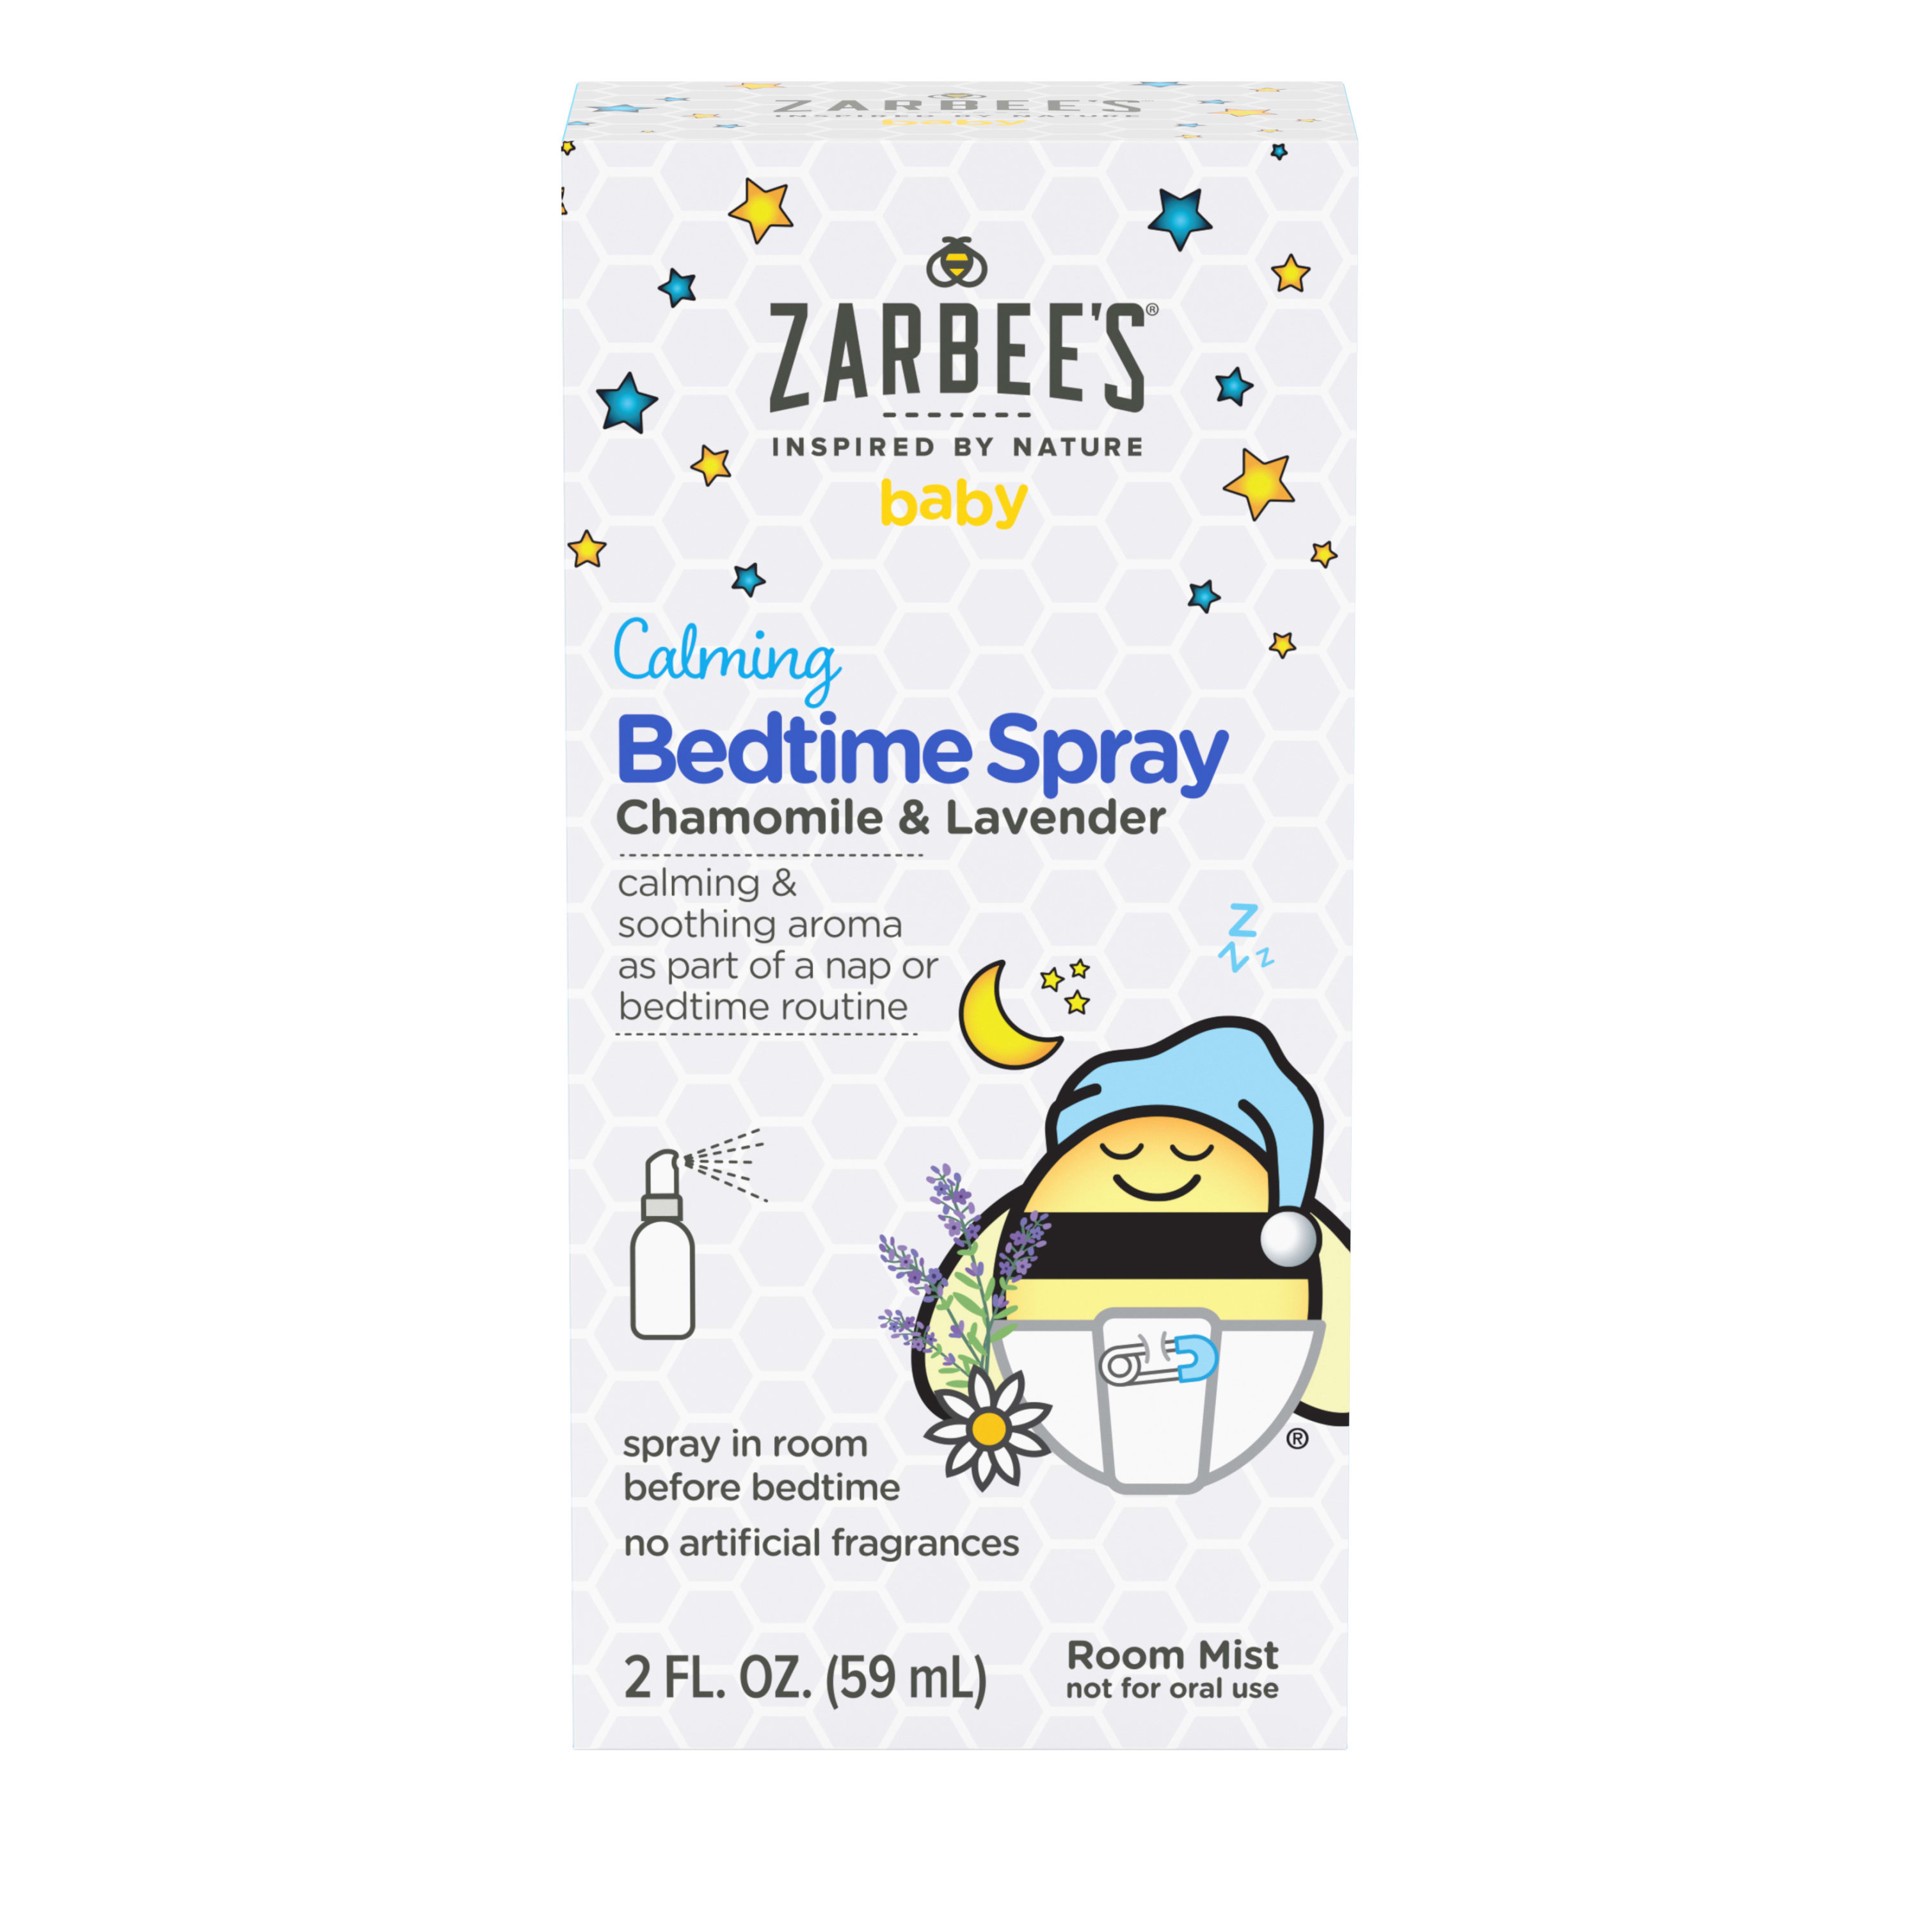 slide 1 of 13, Zarbee's Naturals Baby Sleep Spray, Calming Bedtime Spray with Natural Lavender and Chamomile to Help Infant
Nighttime Routine, 2oz Bottle, 2 fl oz